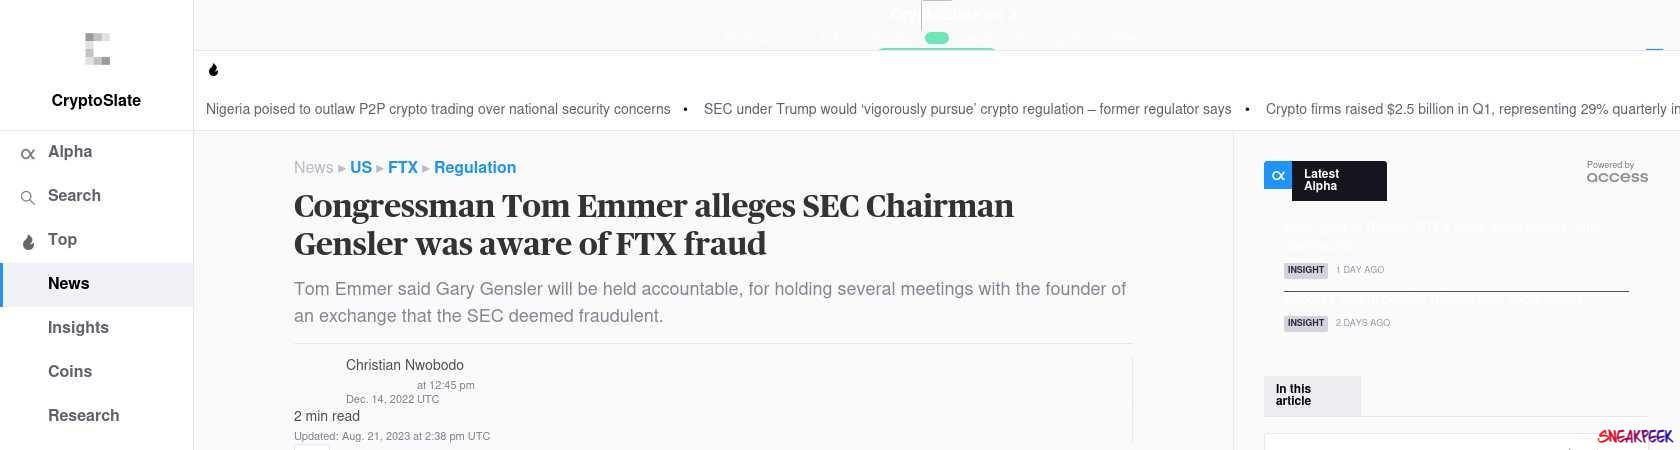 Read the full Article:  ⭲ Congressman Tom Emmer alleges SEC Chairman Gensler was aware of FTX fraud